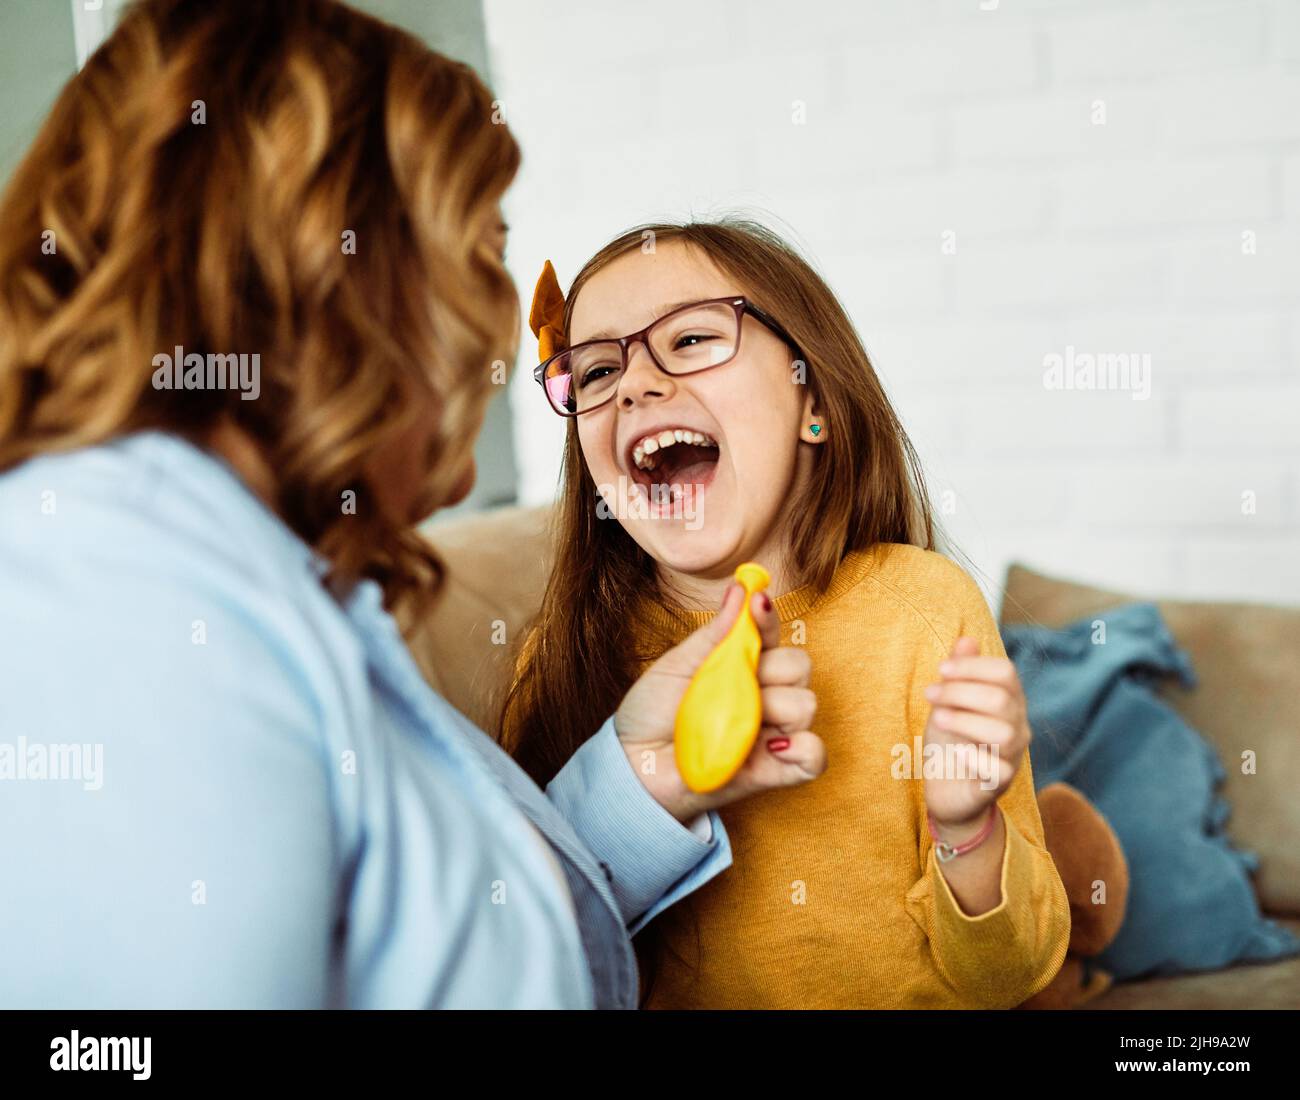 child daughter mother family happy playing kid childhood Stock Photo